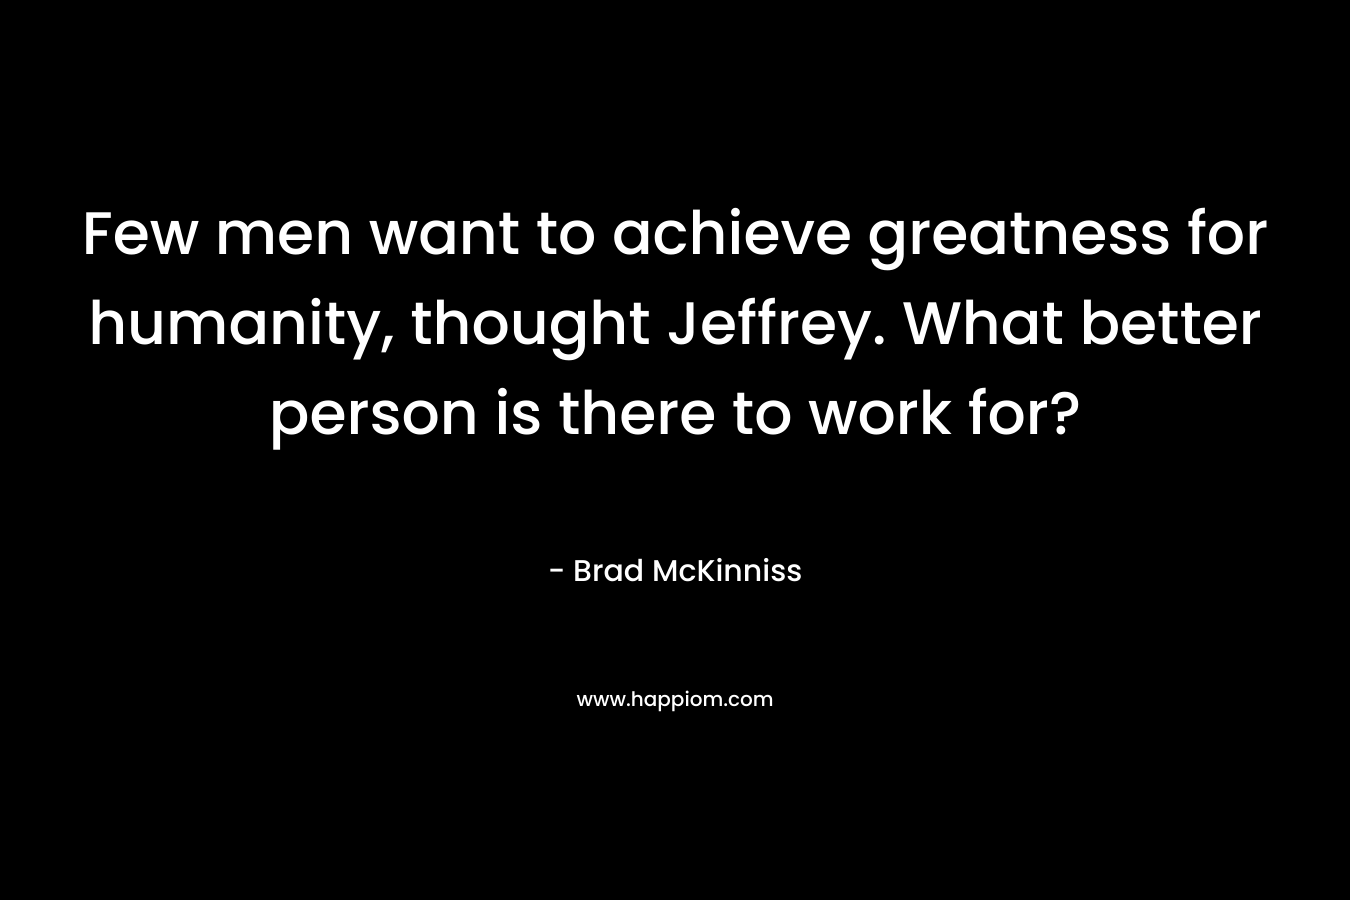 Few men want to achieve greatness for humanity, thought Jeffrey. What better person is there to work for?